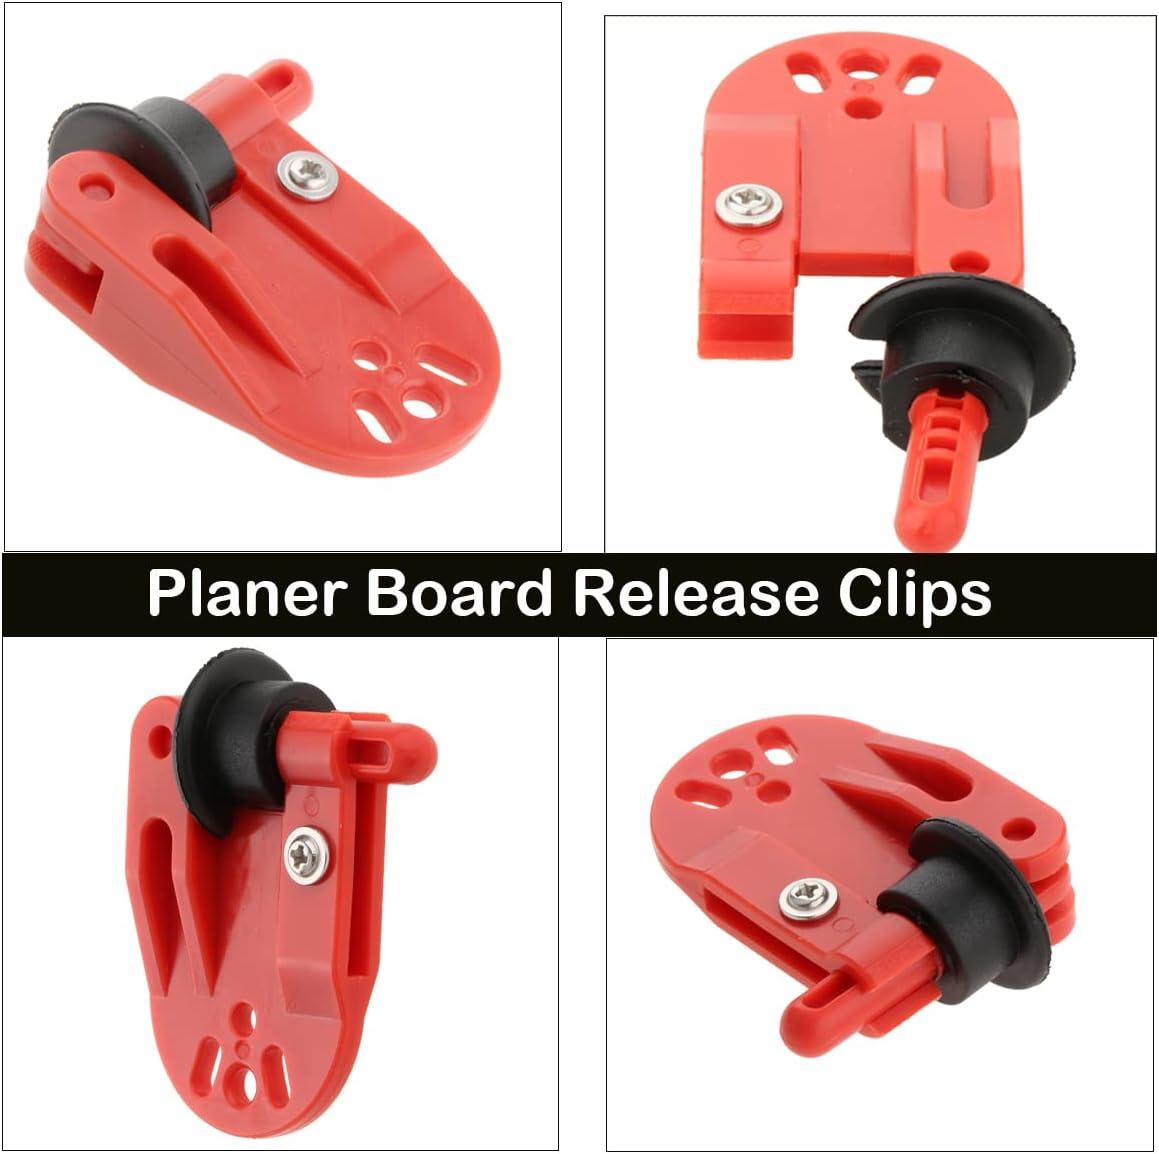 2 Pieces Planer Board Zams pro Release Clips Fishing In-line Side Clip for  Offshore Fishing Tackles Trolling Downrigger Clips